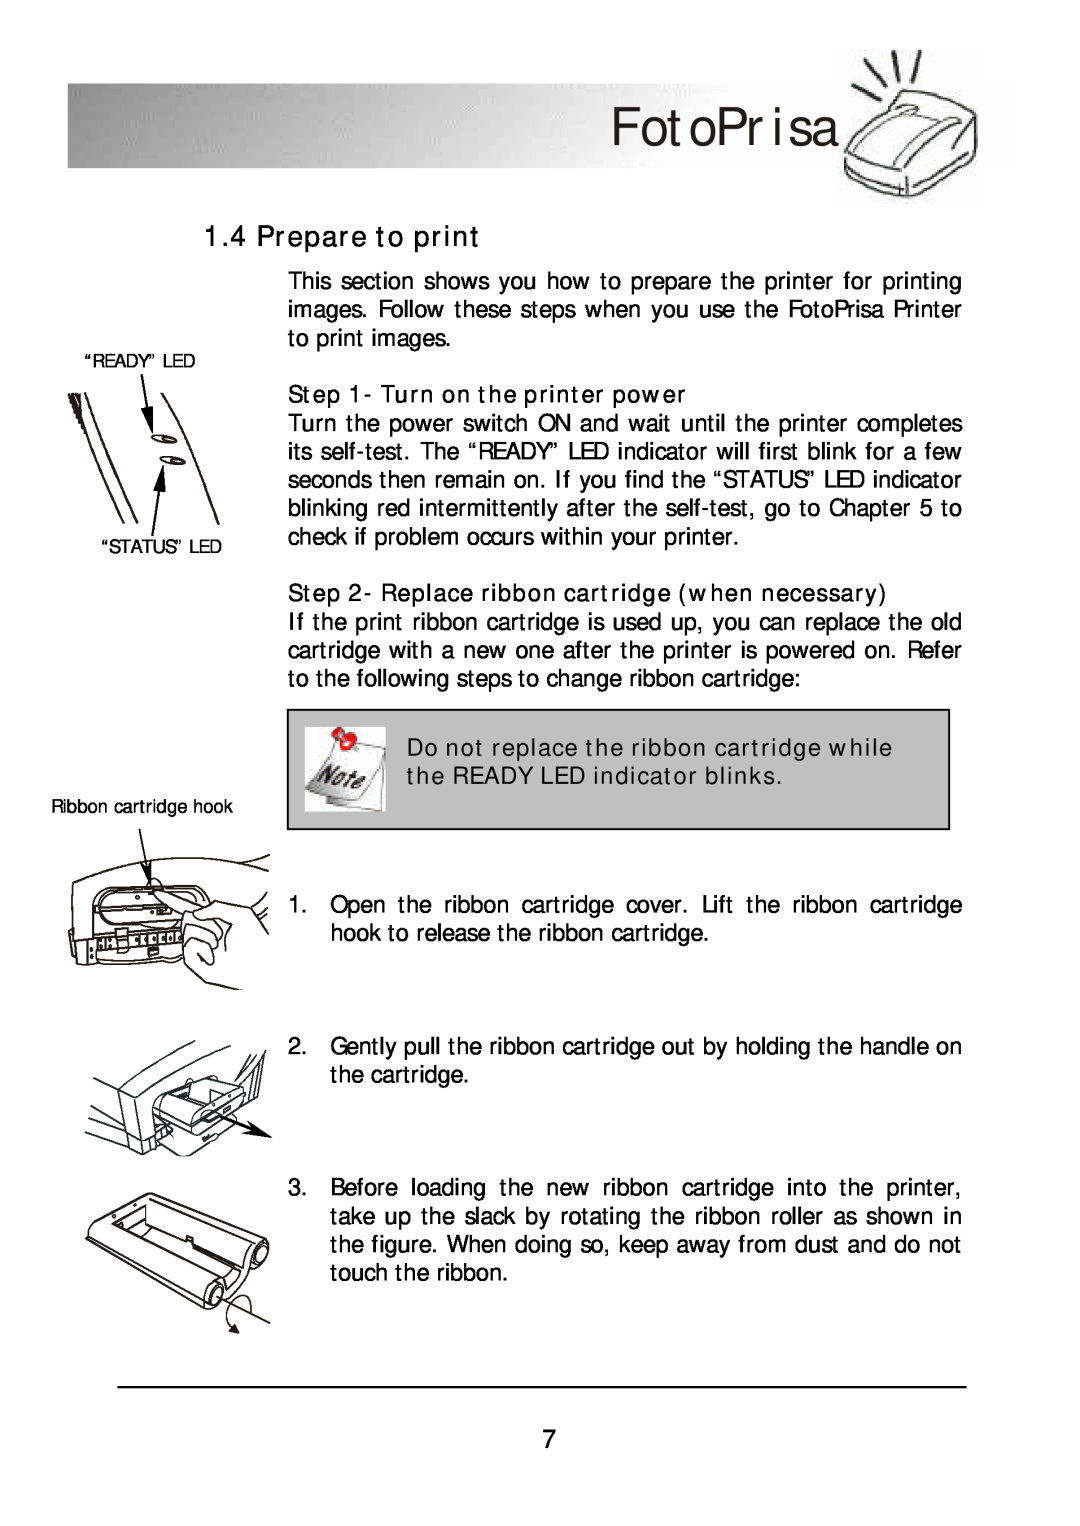 Acer 300P user manual Prepare to print, Turn on the printer power, Replace ribbon cartridge when necessary, FotoPrisa 